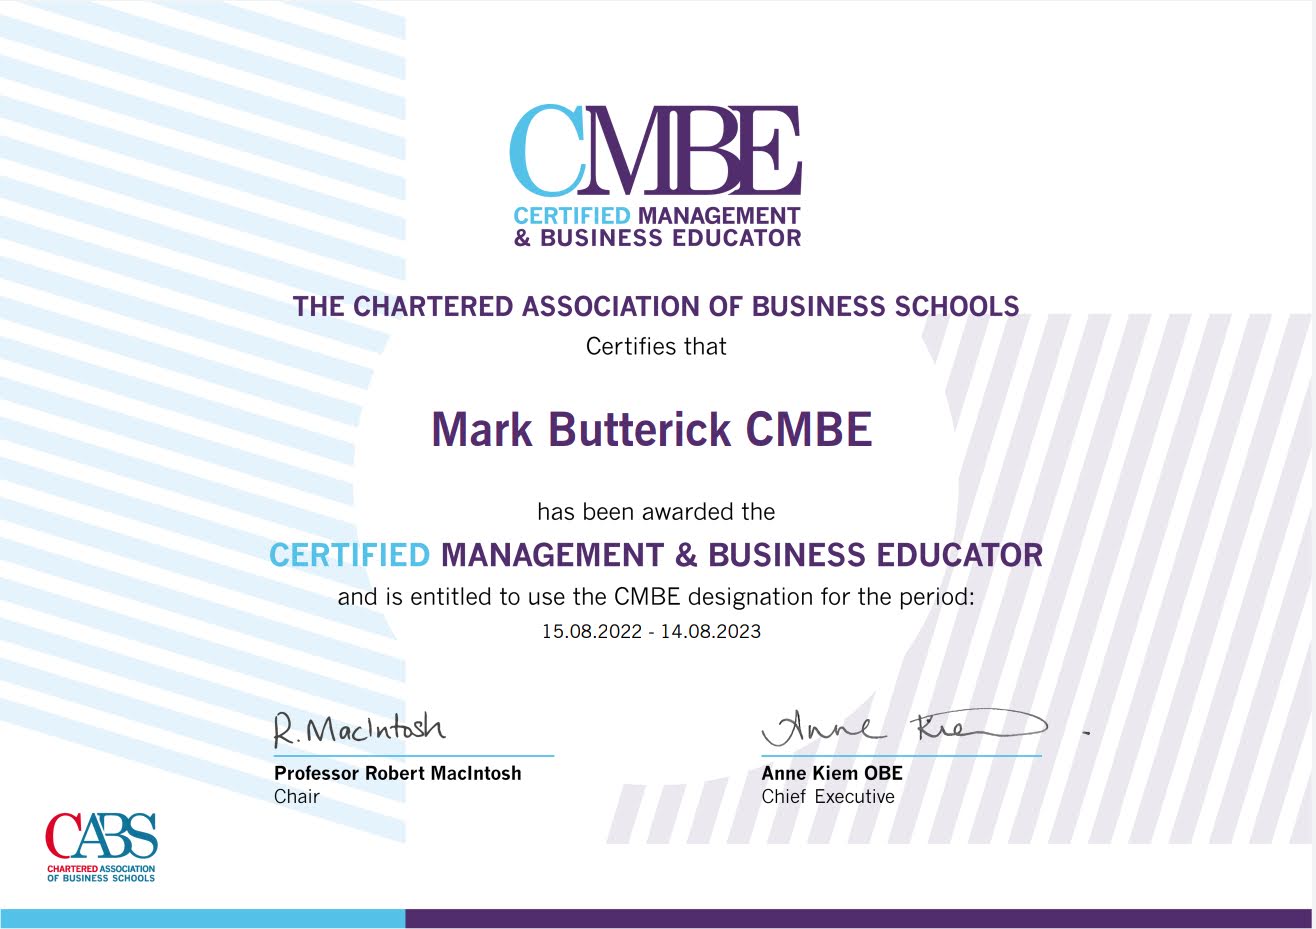 Mark Butterick CMBE